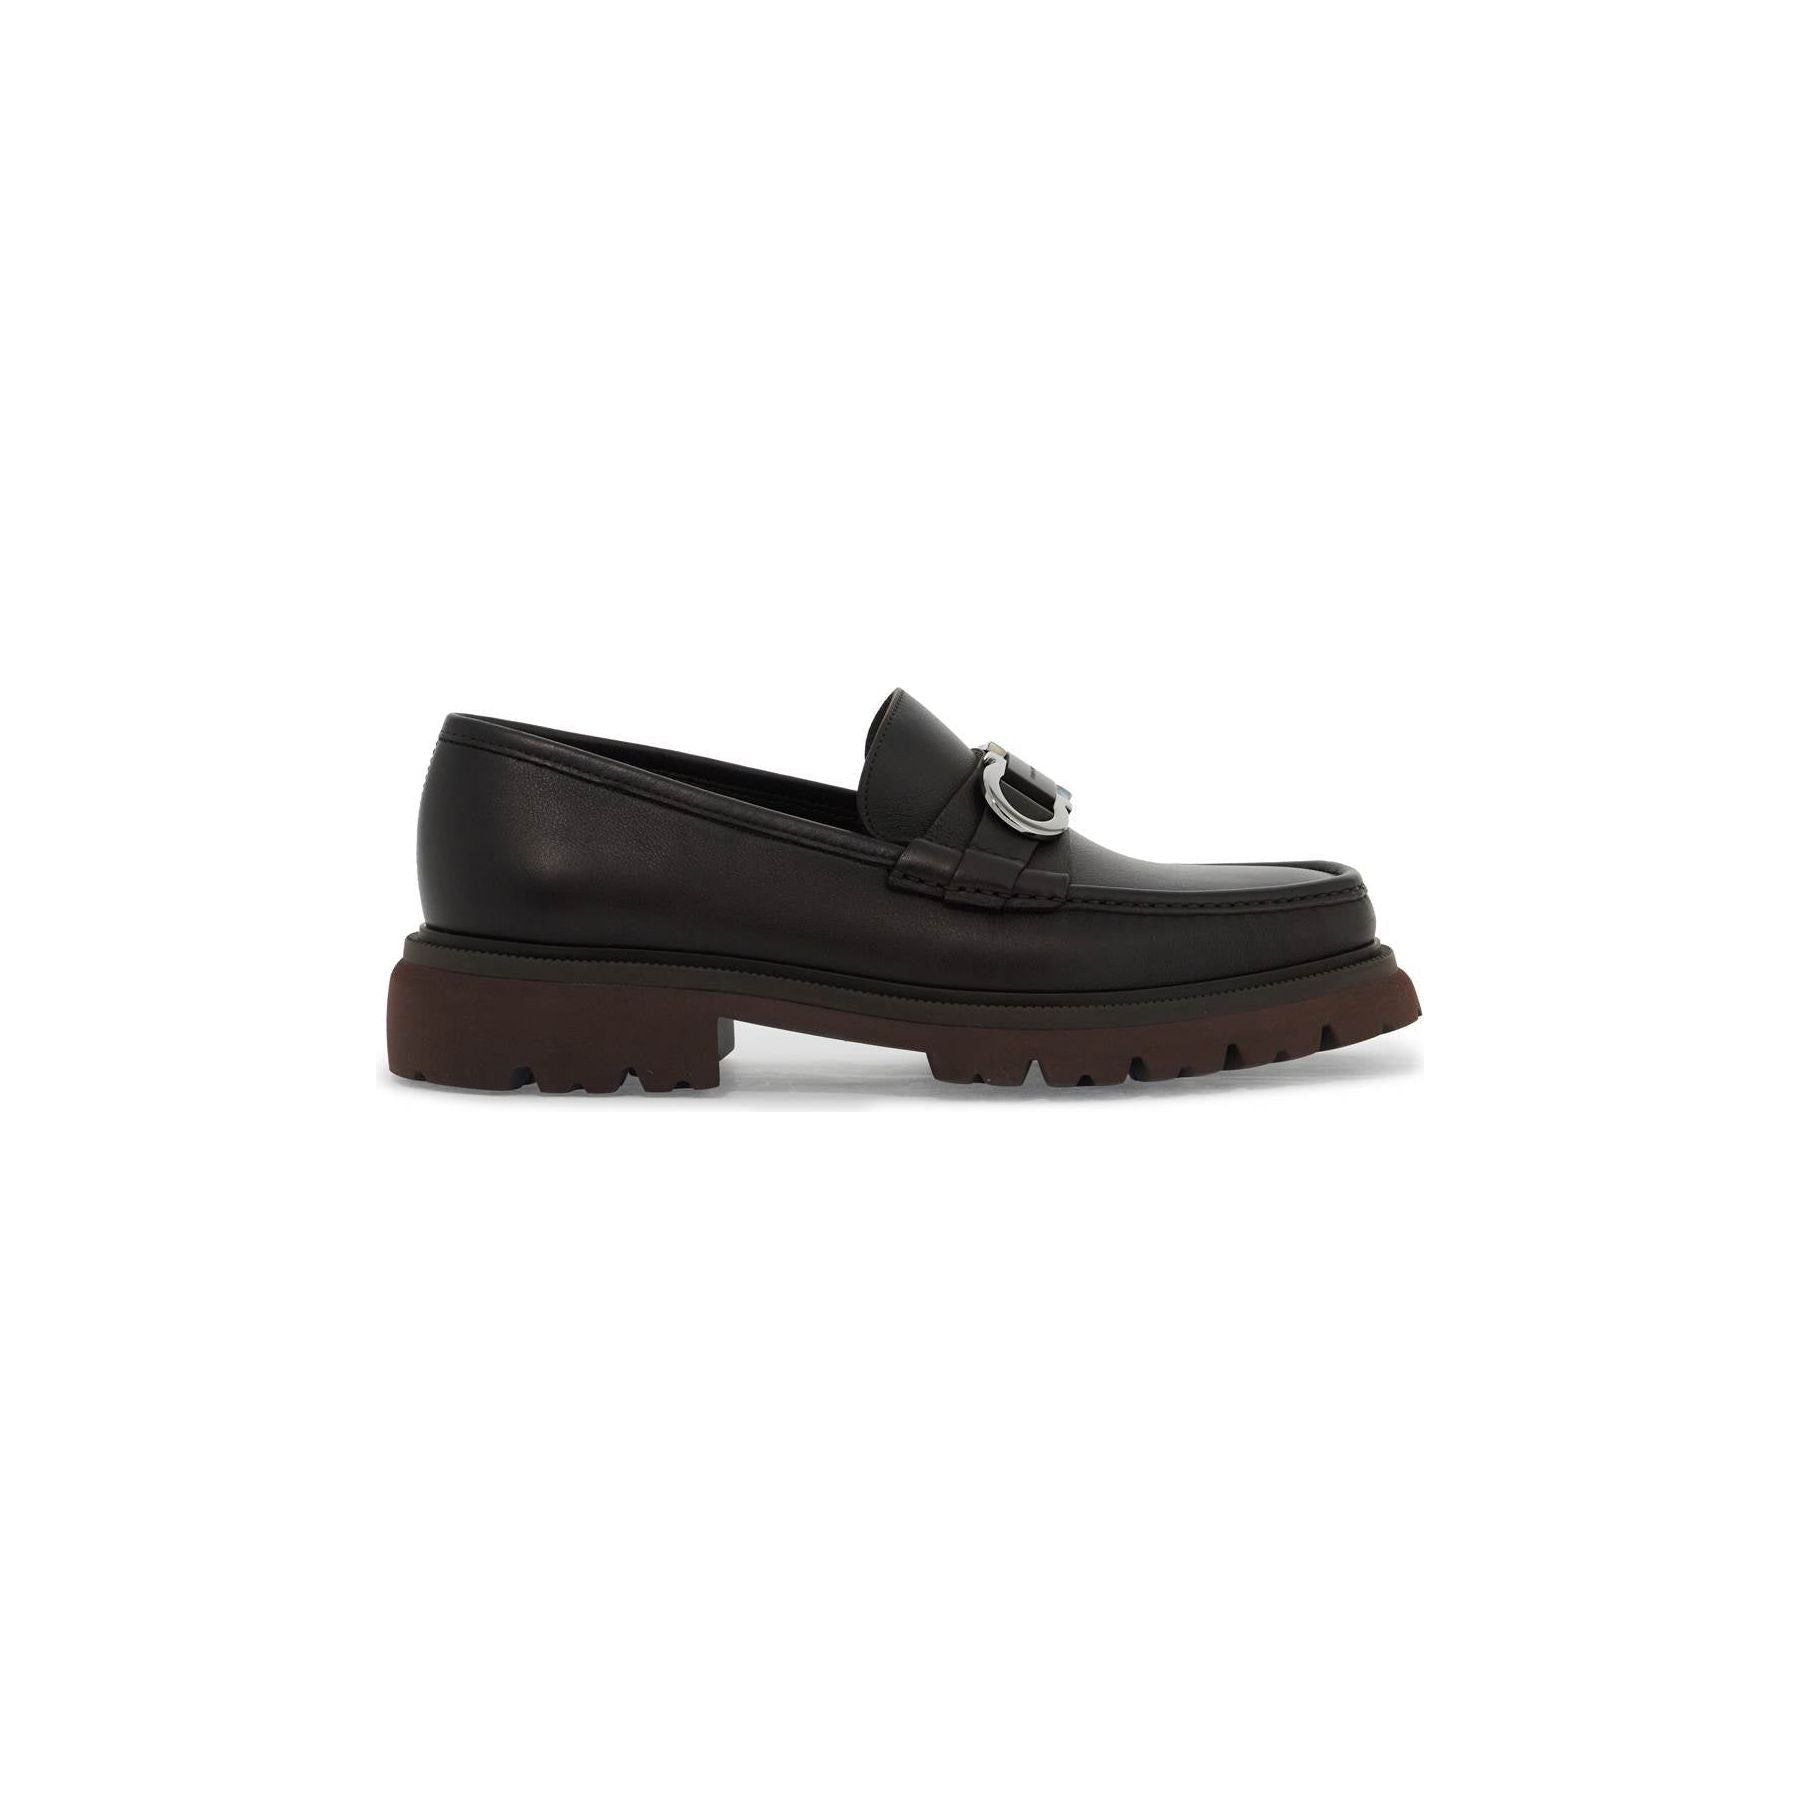 Cocoon Gancini Loafers